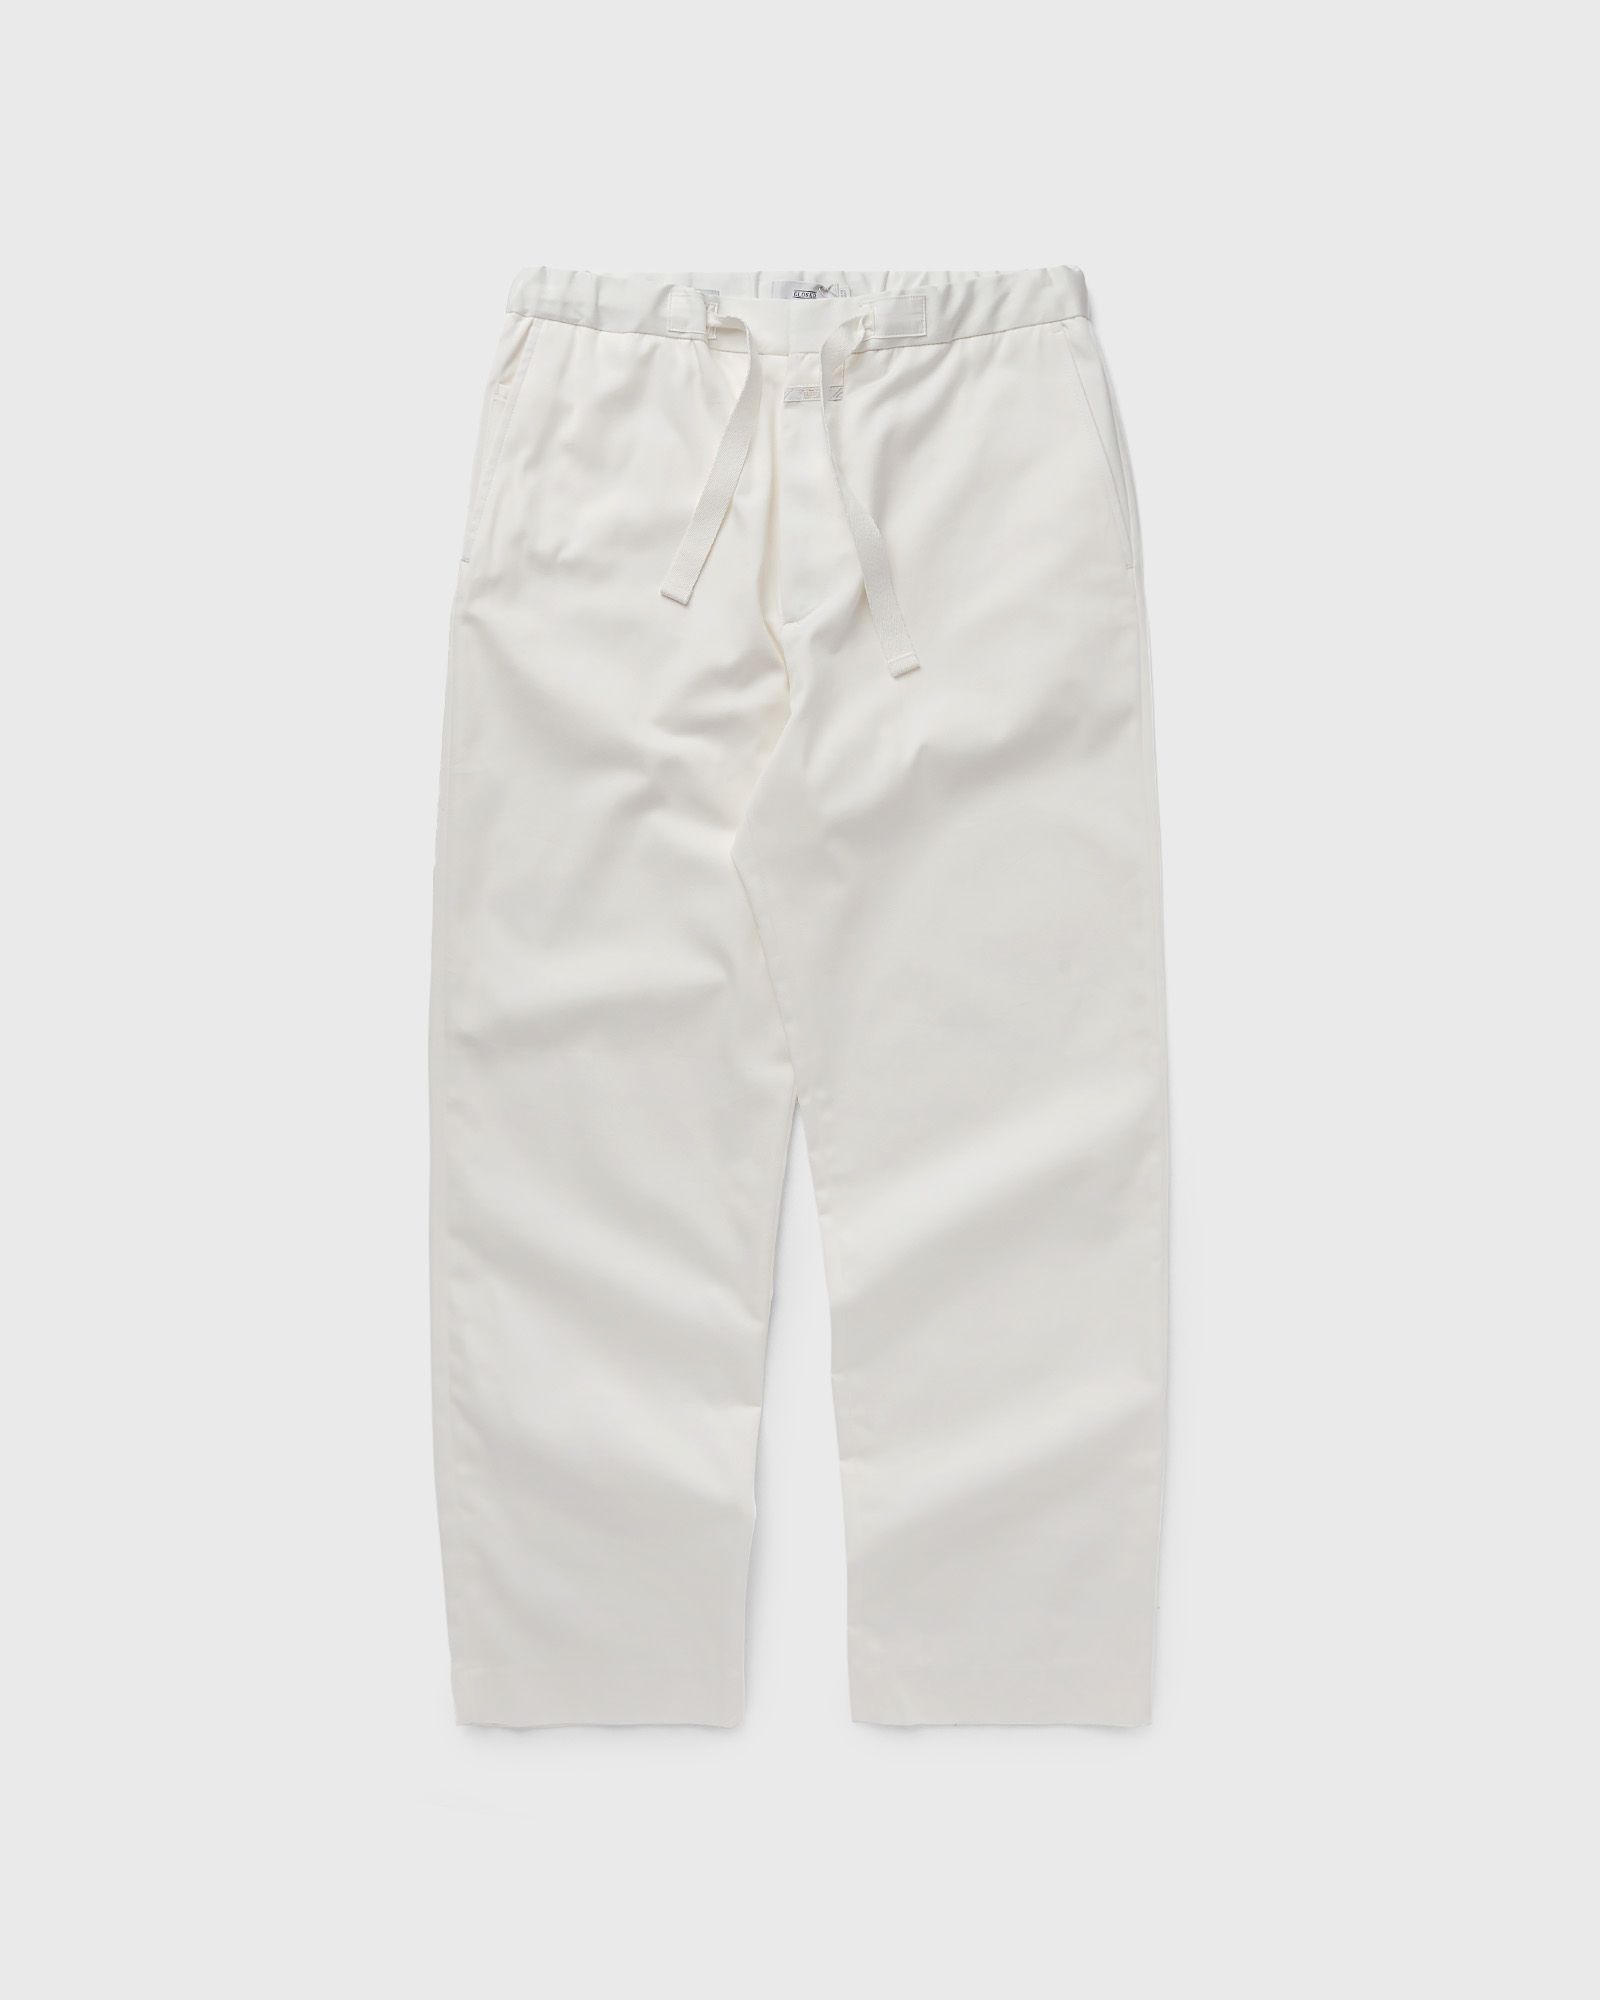 CLOSED - nanaimo straight men casual pants white in größe:l